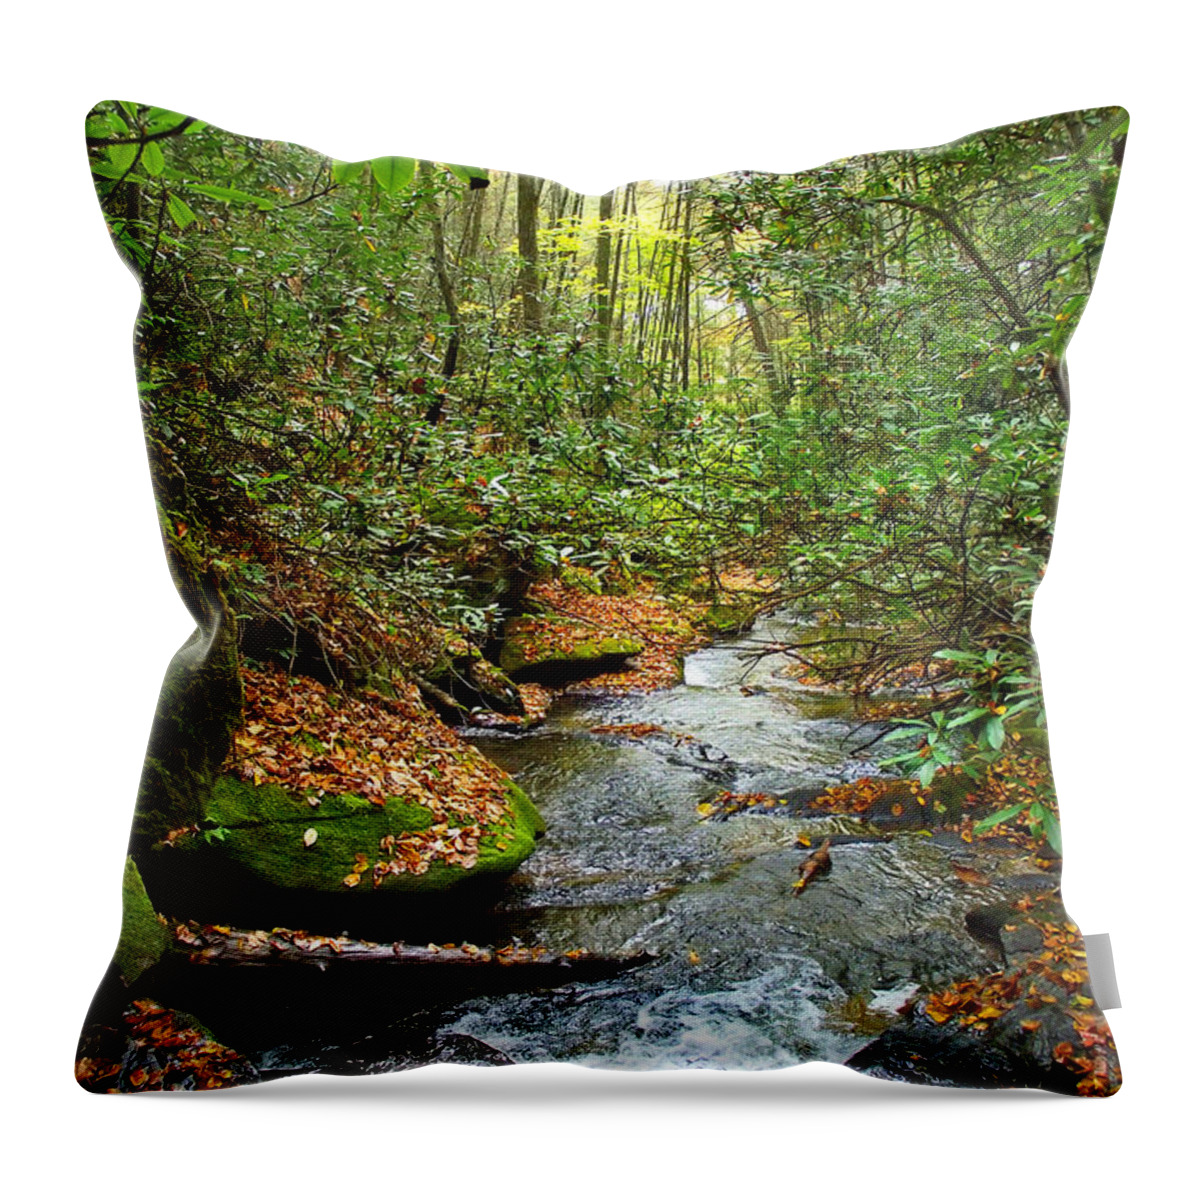 Landscapes Throw Pillow featuring the photograph Lamance Creek by Duane McCullough